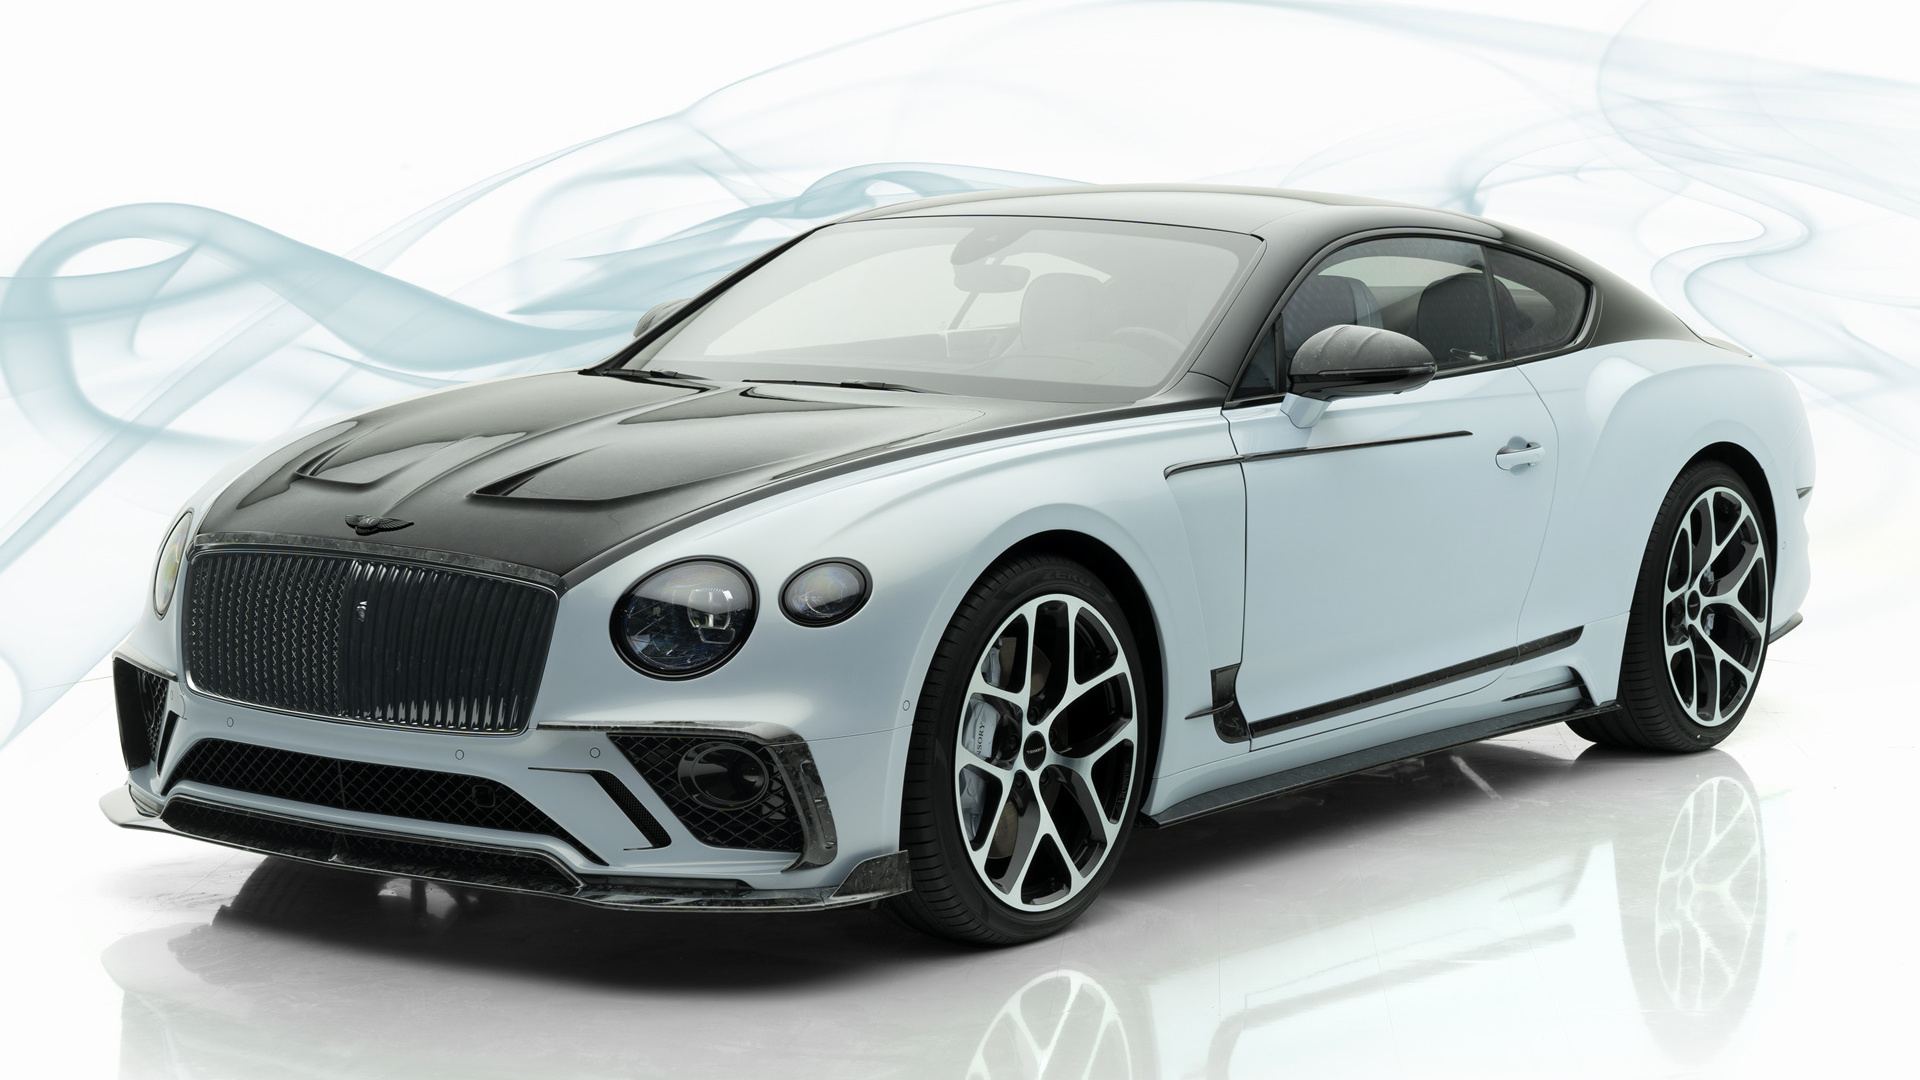 Bentley Continental Gt By Mansory Car Grand Tourer Luxury Car Sport Car Tuning 1920x1080